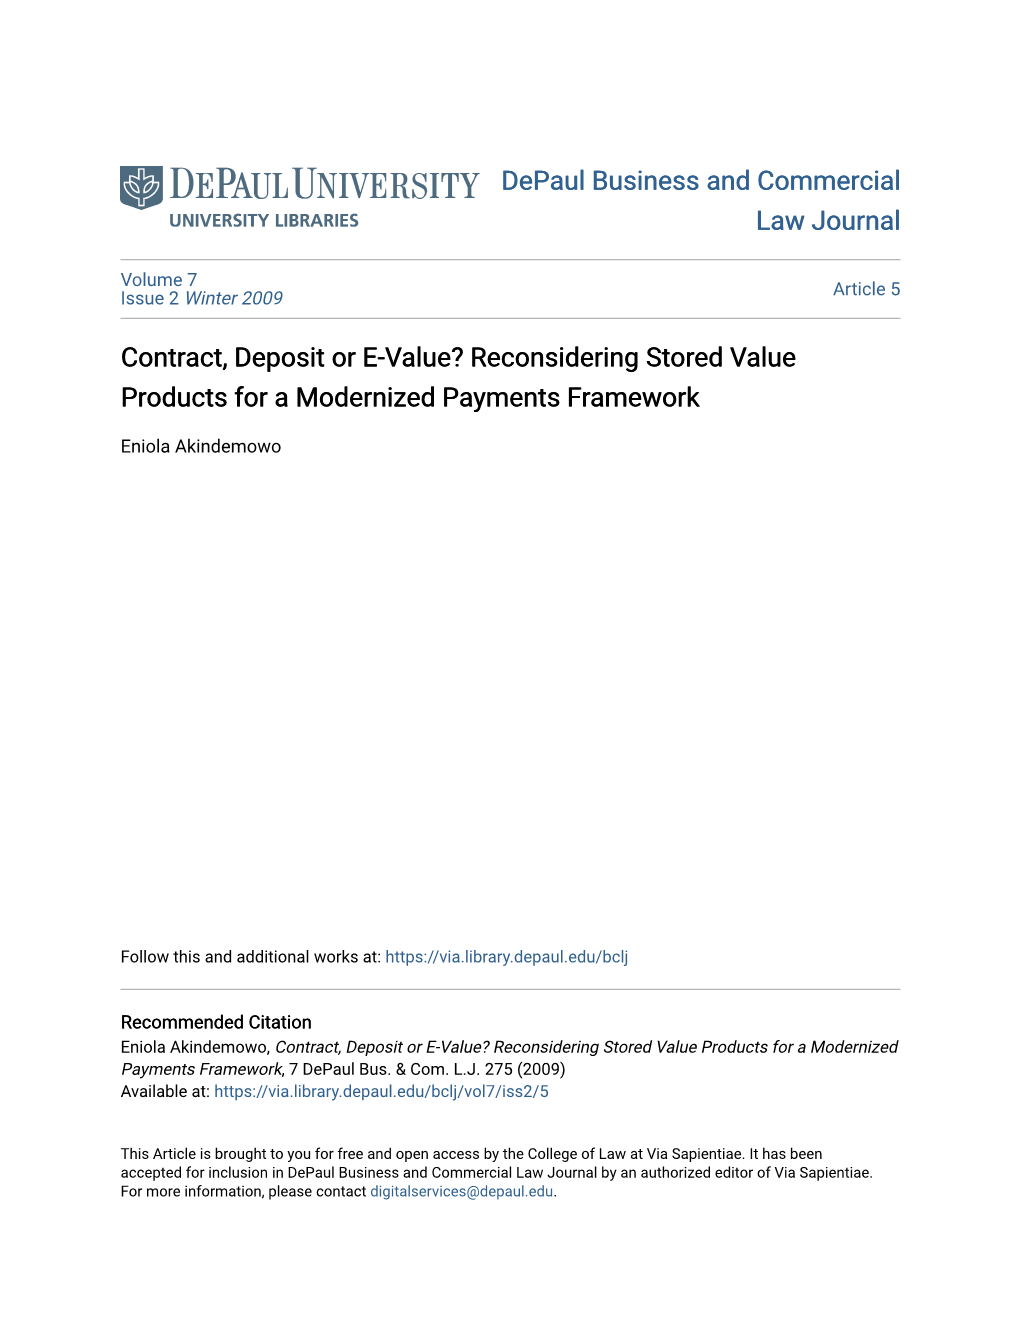 Reconsidering Stored Value Products for a Modernized Payments Framework